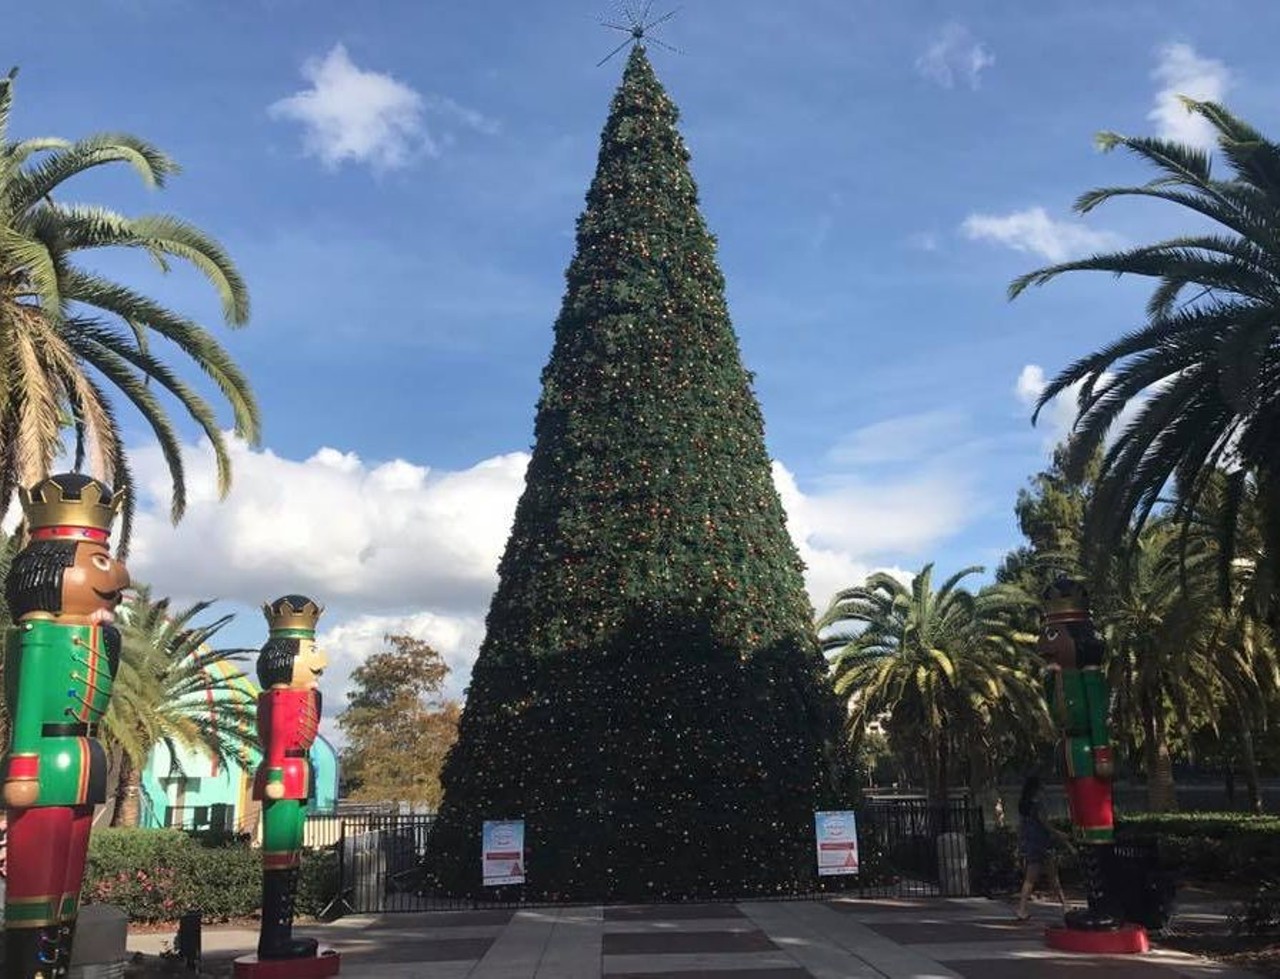 Listen to Christmas music at Lake Eola
512 E Washington St. | 407-246-2121
Through Jan. 6, evenings at Lake Eola will come alive with Christmas music, decorations, and a holiday light show. So bring a blanket, lay out, and enjoy hearing favorites like &#147;Jingle Bells&#148; and &#147;Santa Claus Is Comin&#146; To Town&#148;. Check their website for additional events, like a special appearance from the Florida Symphony Youth Orchestra on Dec. 2, at 6p.m.
Photo via Lake Eola/Twitter